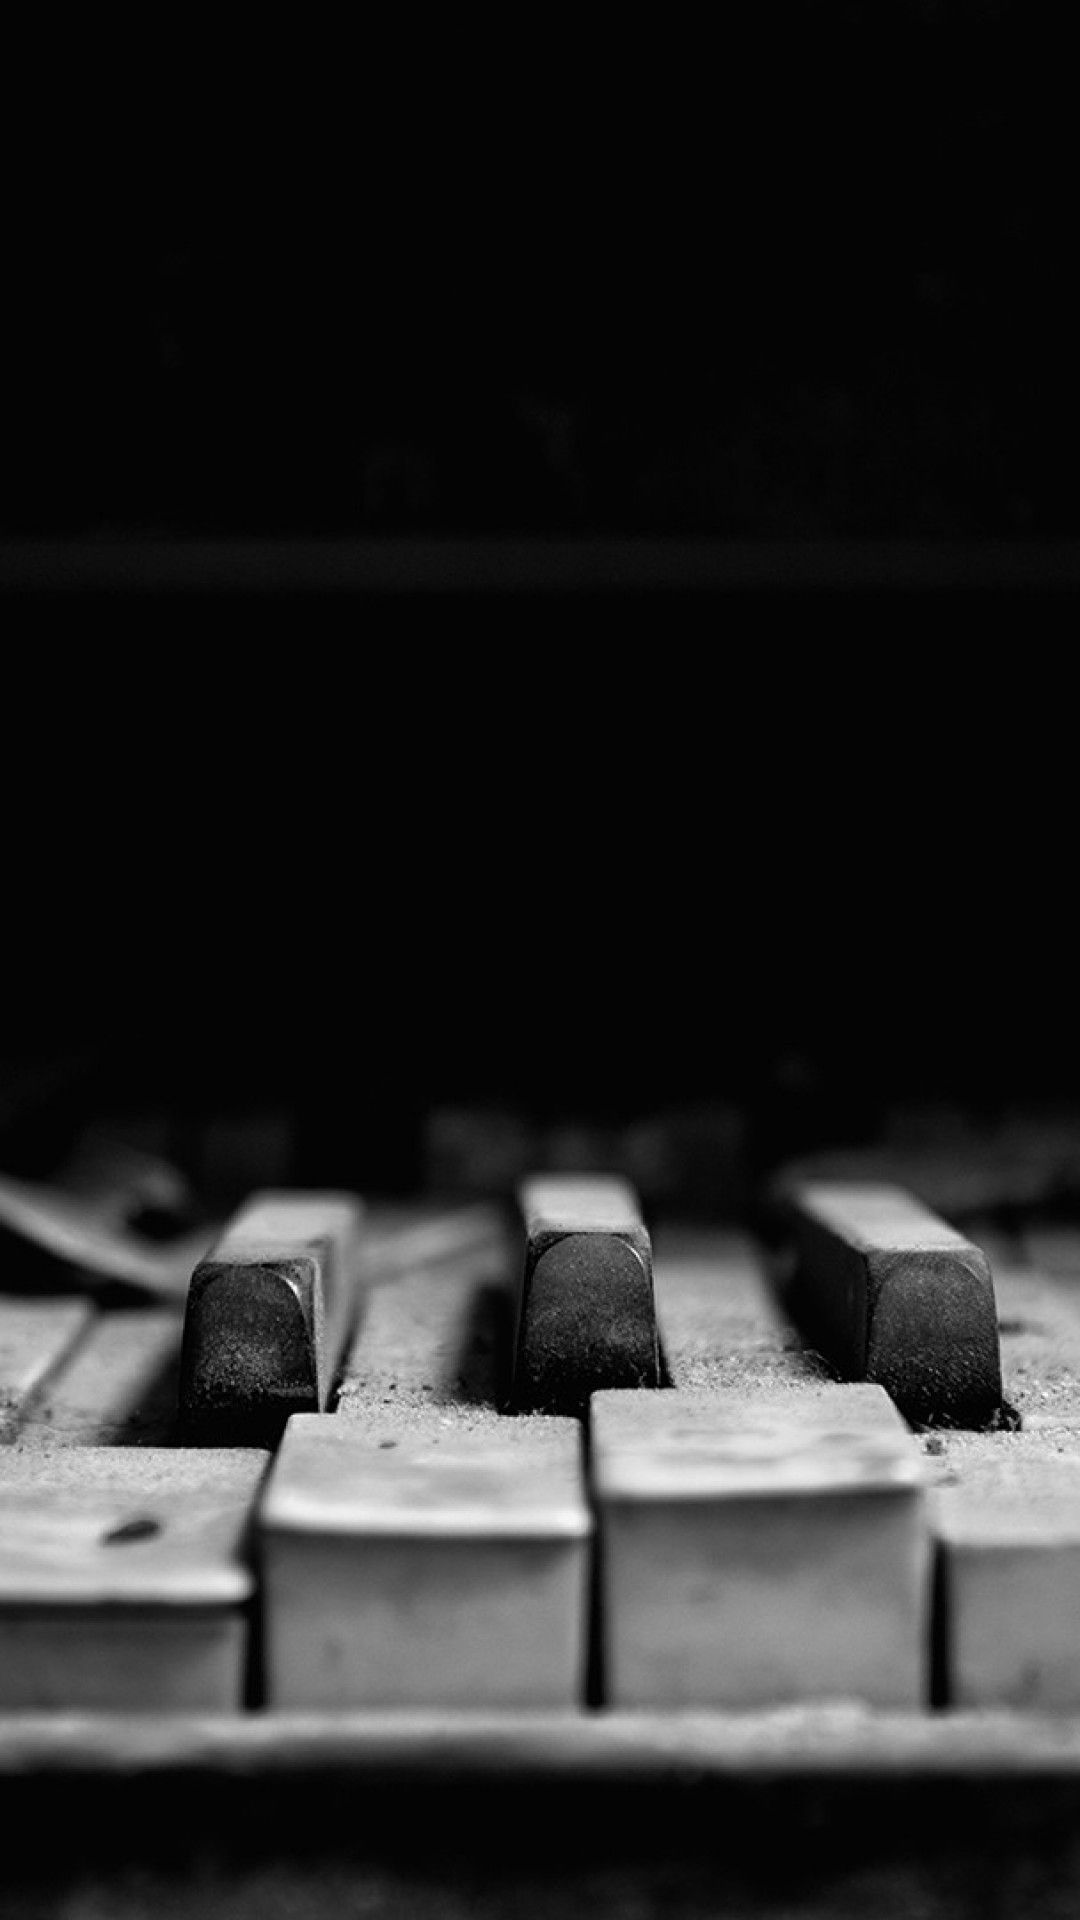 Download 1080x1920 Piano Keyboard, Dust, Music, Instrument Wallpaper for iPhone iPhone 7 Plus, iPhone 6+, Sony Xperia Z, HTC One